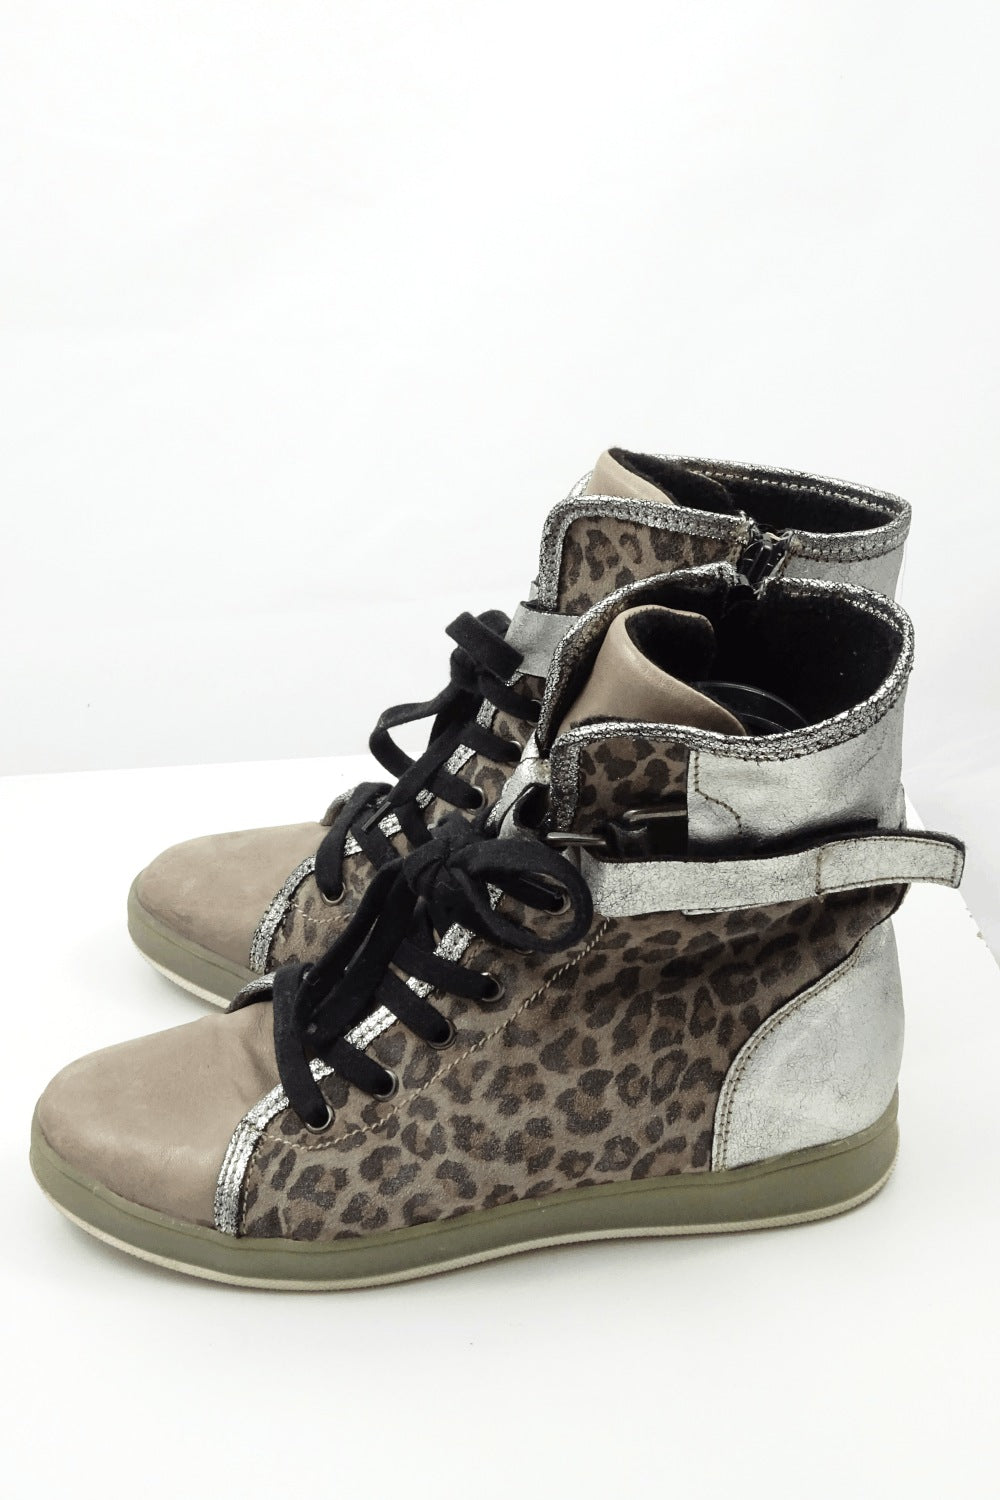 Manas brown sneakers with animal print and silver detailing. Closure via black laces and side zip. Soul length 26cm